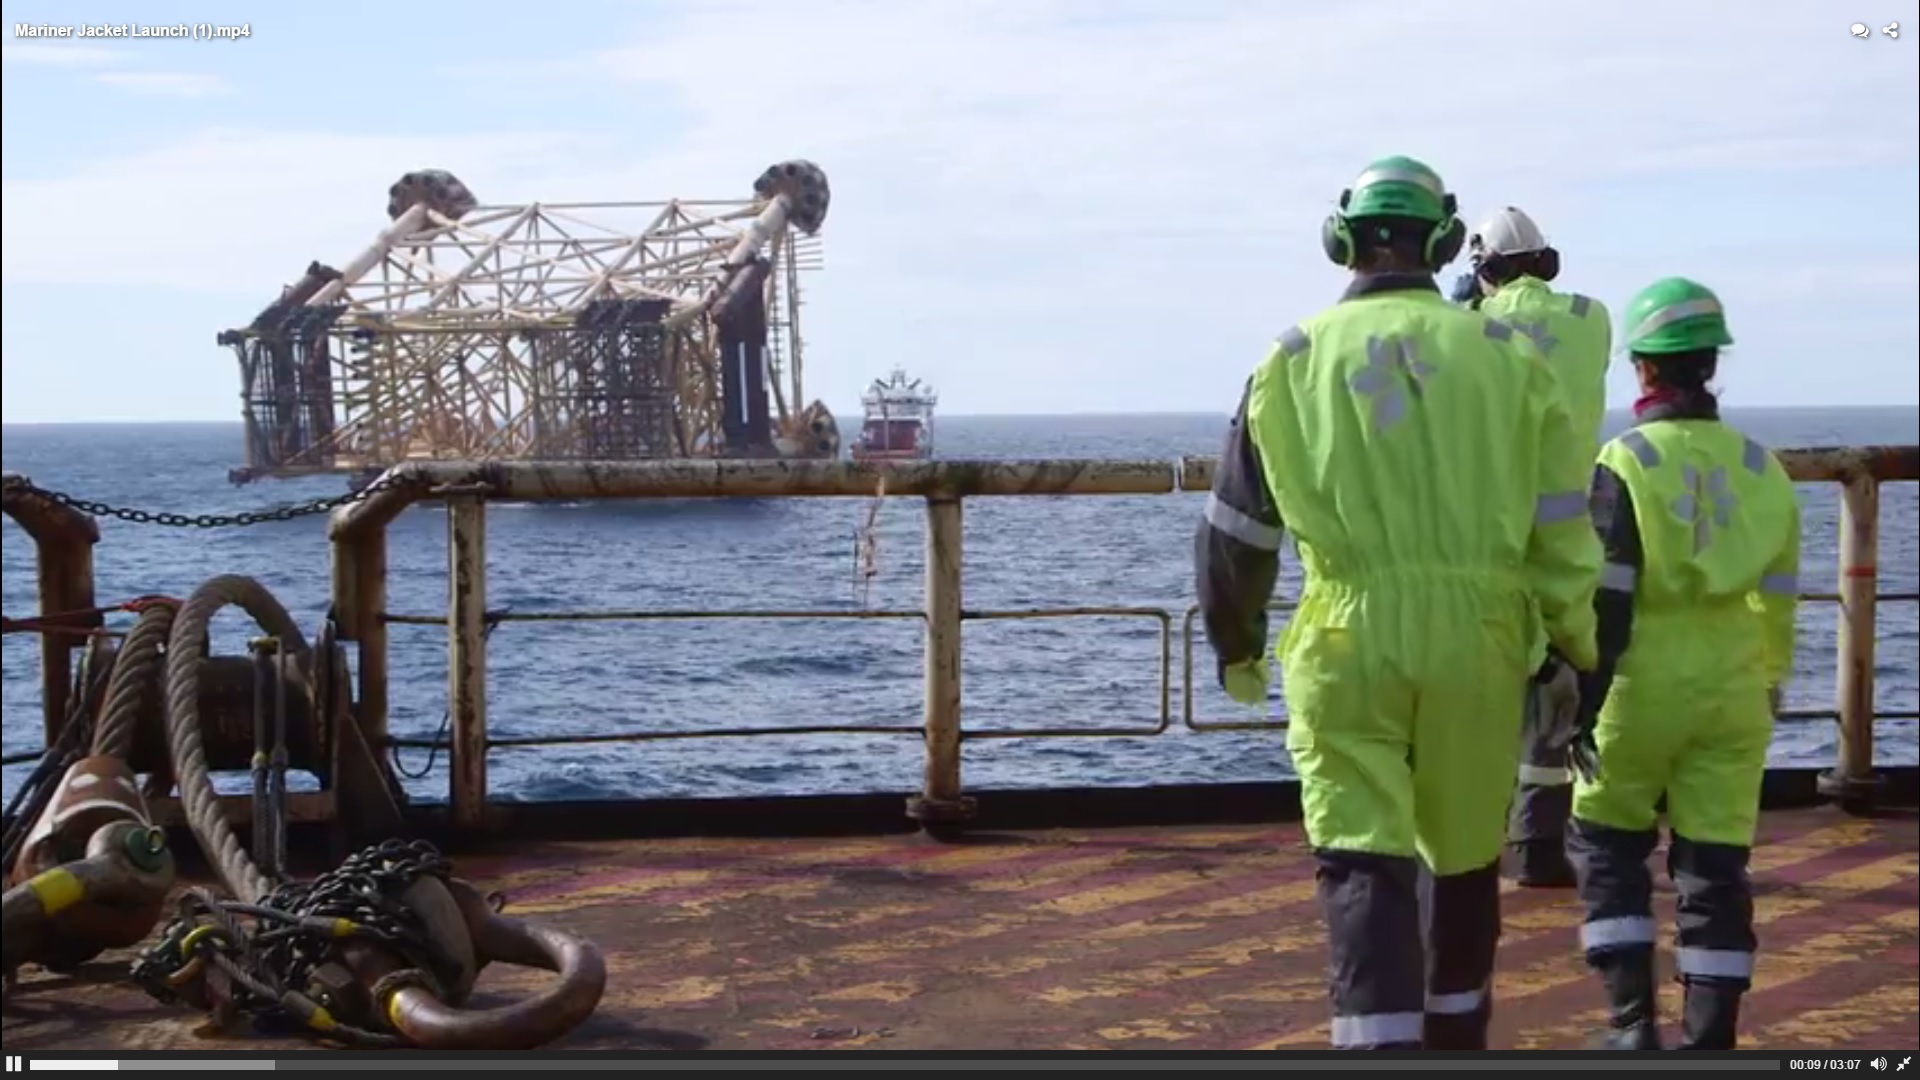 VIDEO: How to install a 19,300 tonne jacket onto the North Sea’s seabed